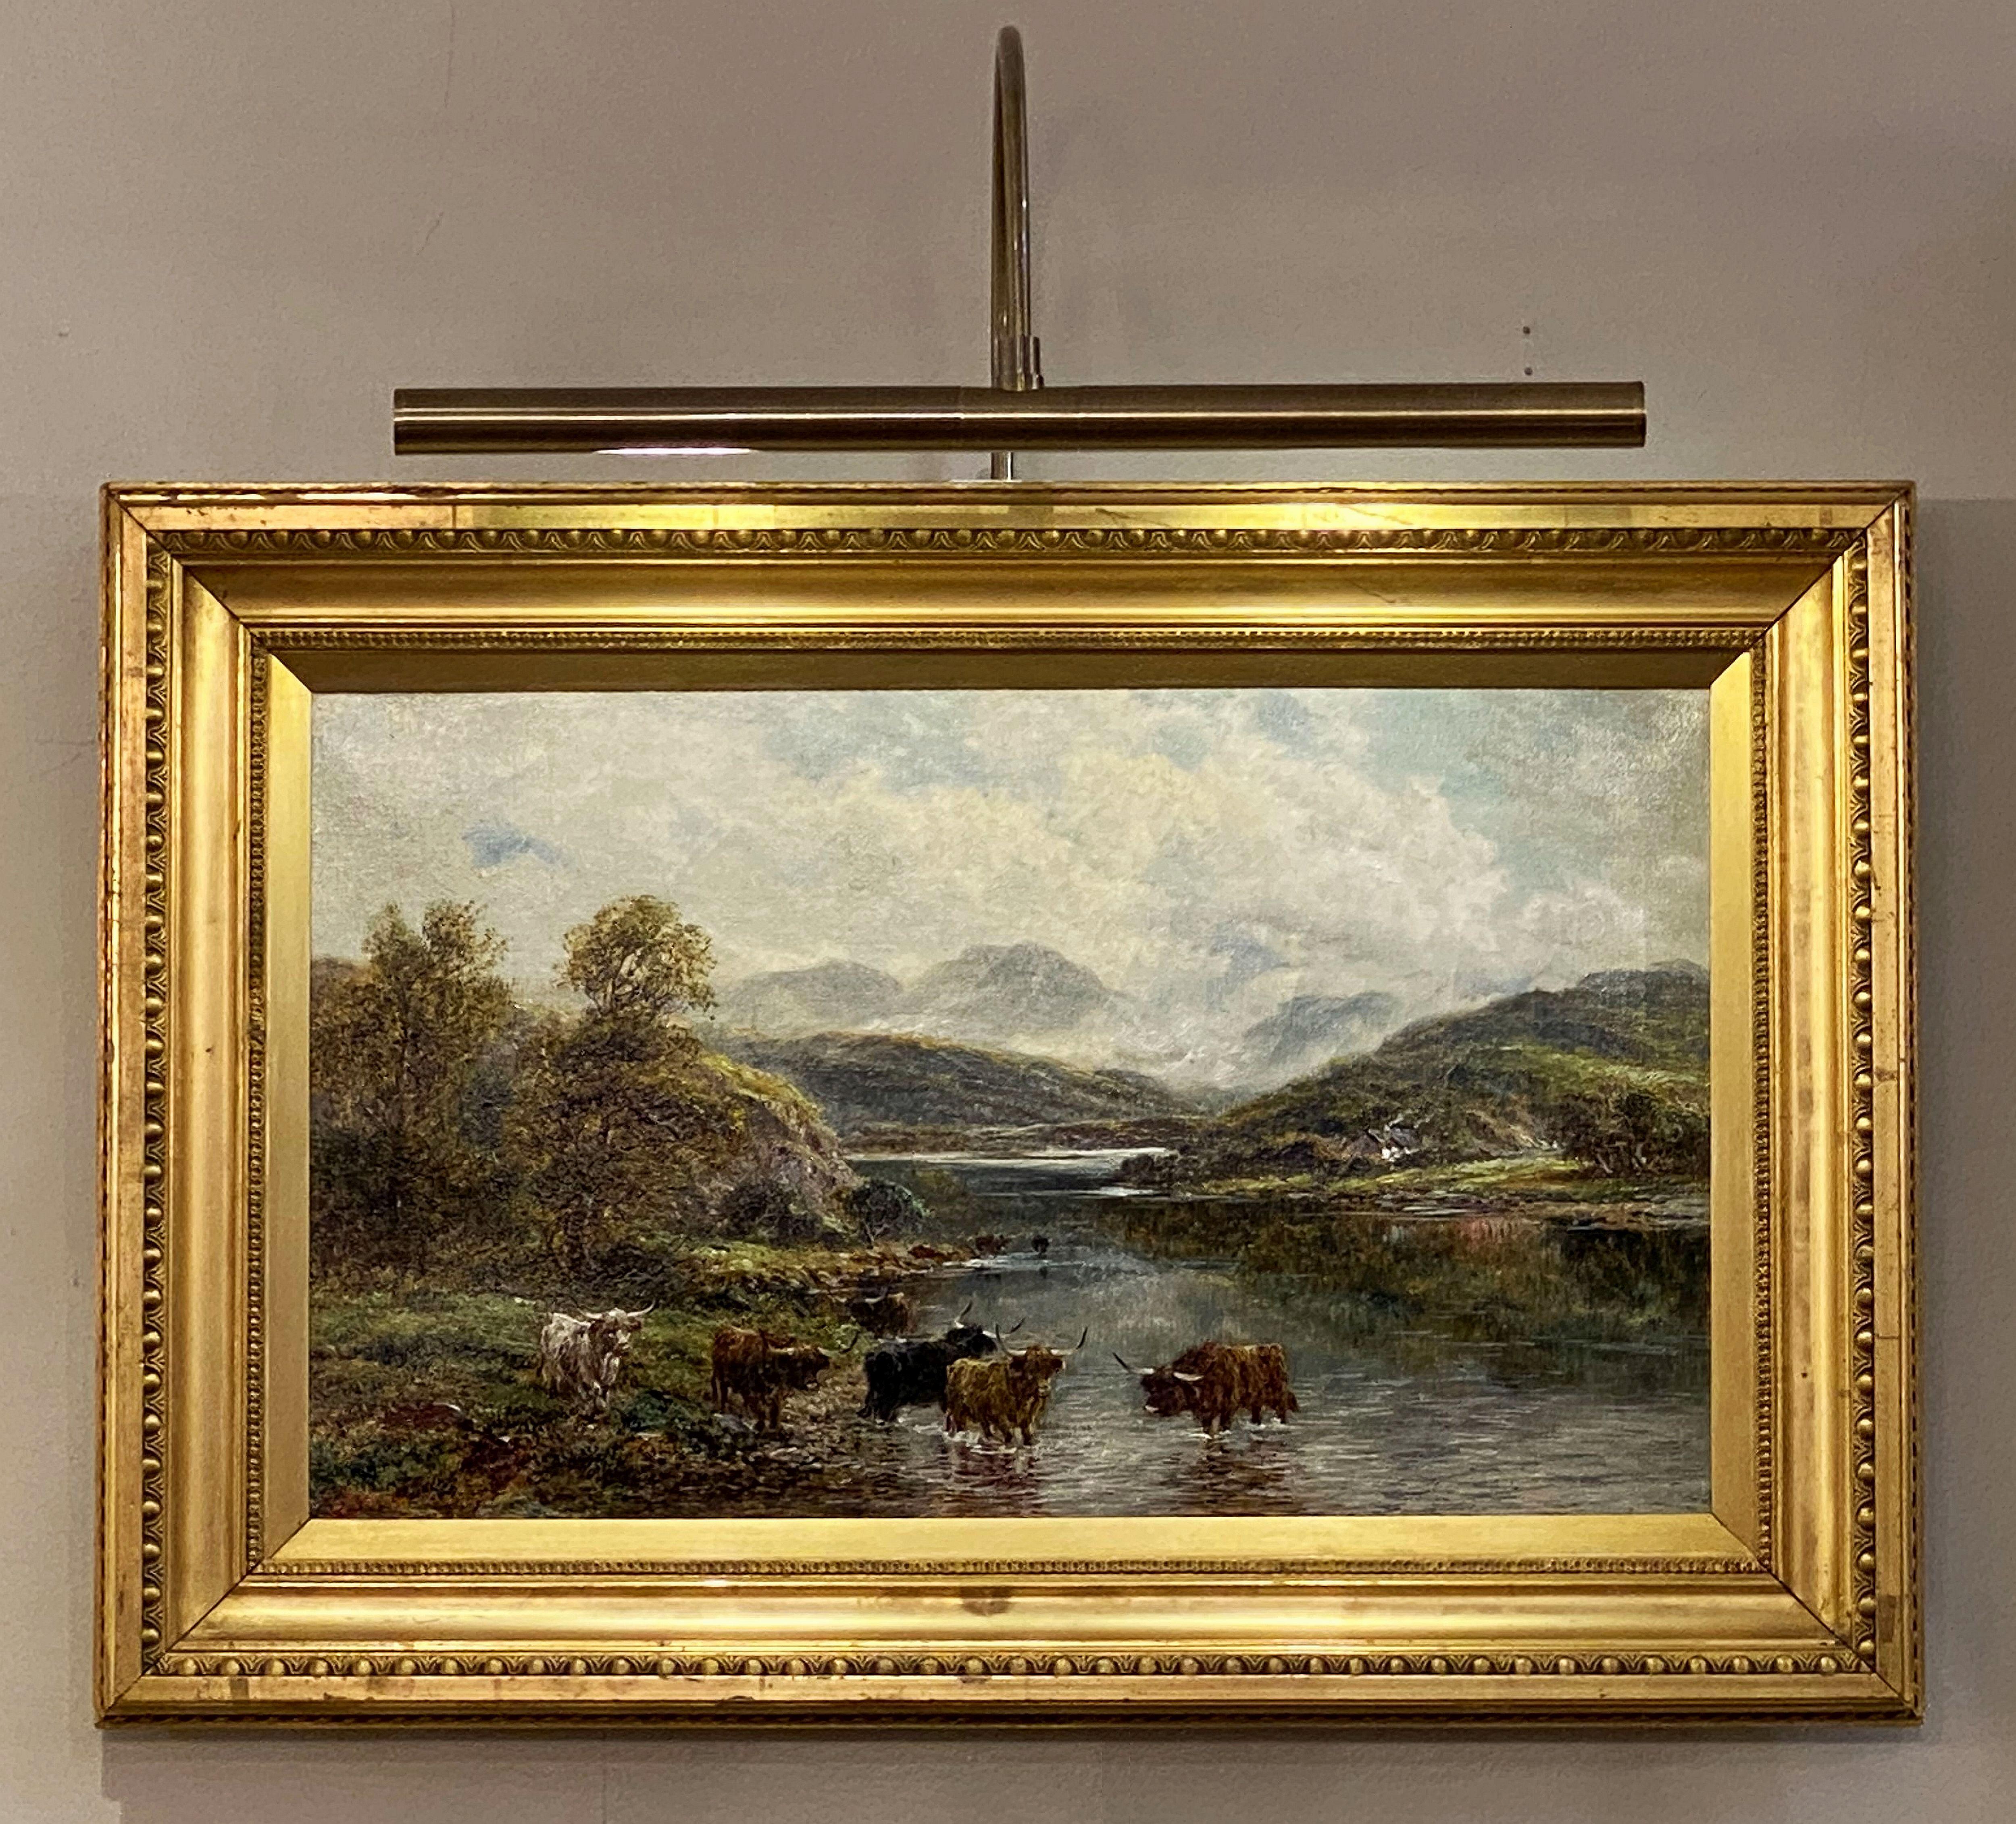 A fine rectangular English oil painting on canvas in a giltwood frame, featuring a highland river landscape with watering cattle.

Signed: Andrew Lennox

Dimensions: H 17 1/4 inches x W 25 1/2 inches x D 1 3/4 inches.